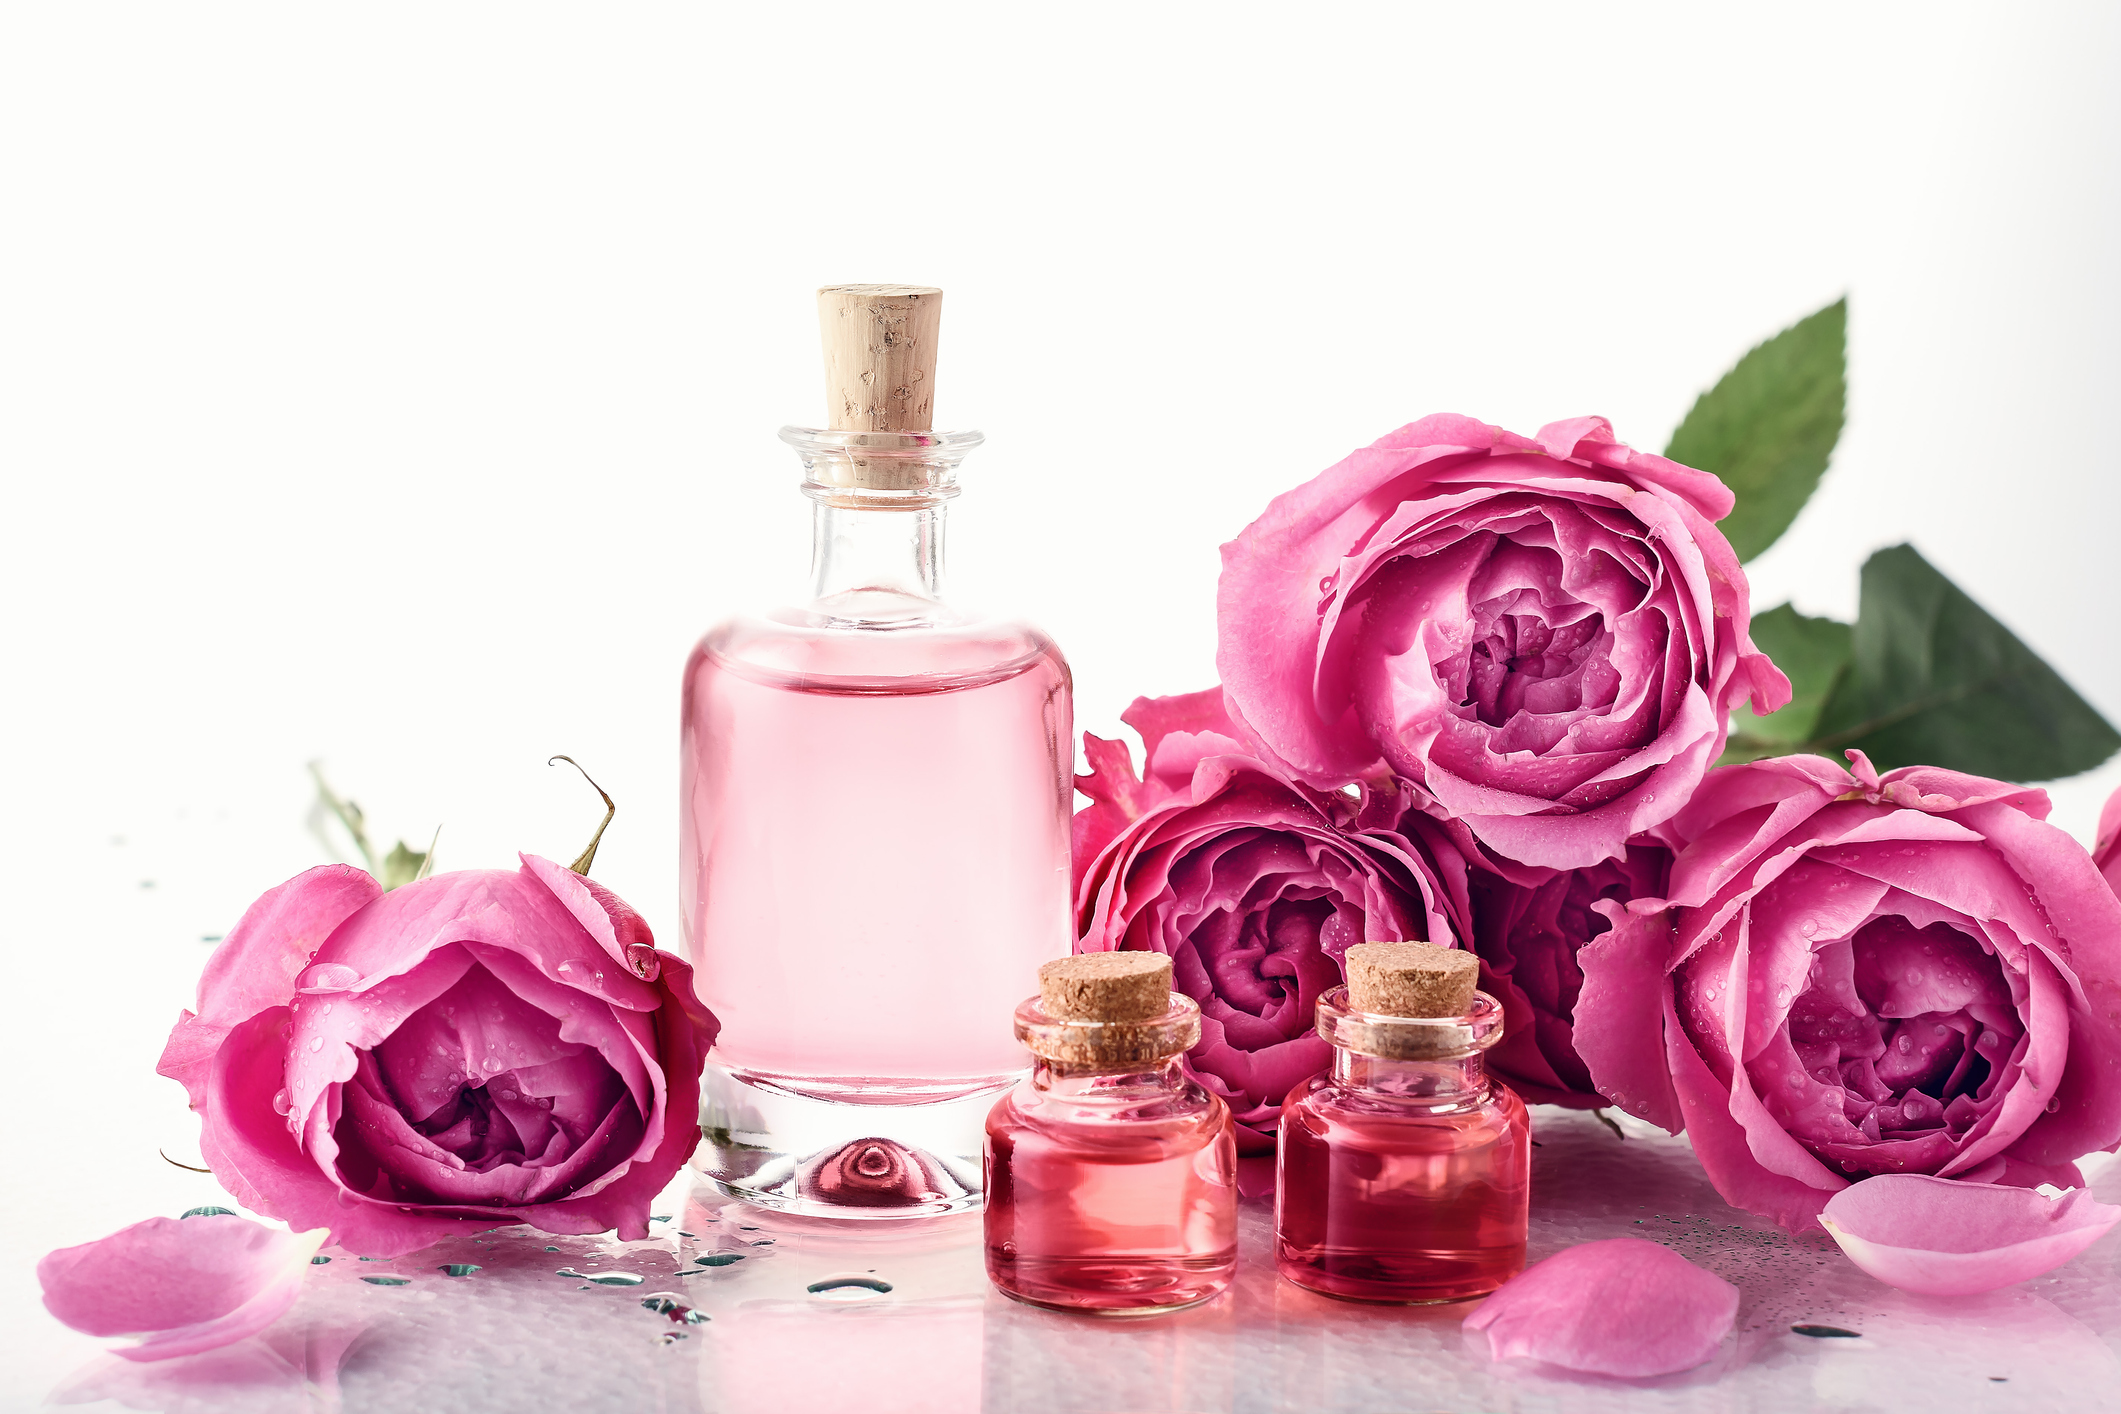 Bottles filled with rosewater and roses surrounding them to be used for a hand soak to end dry skin